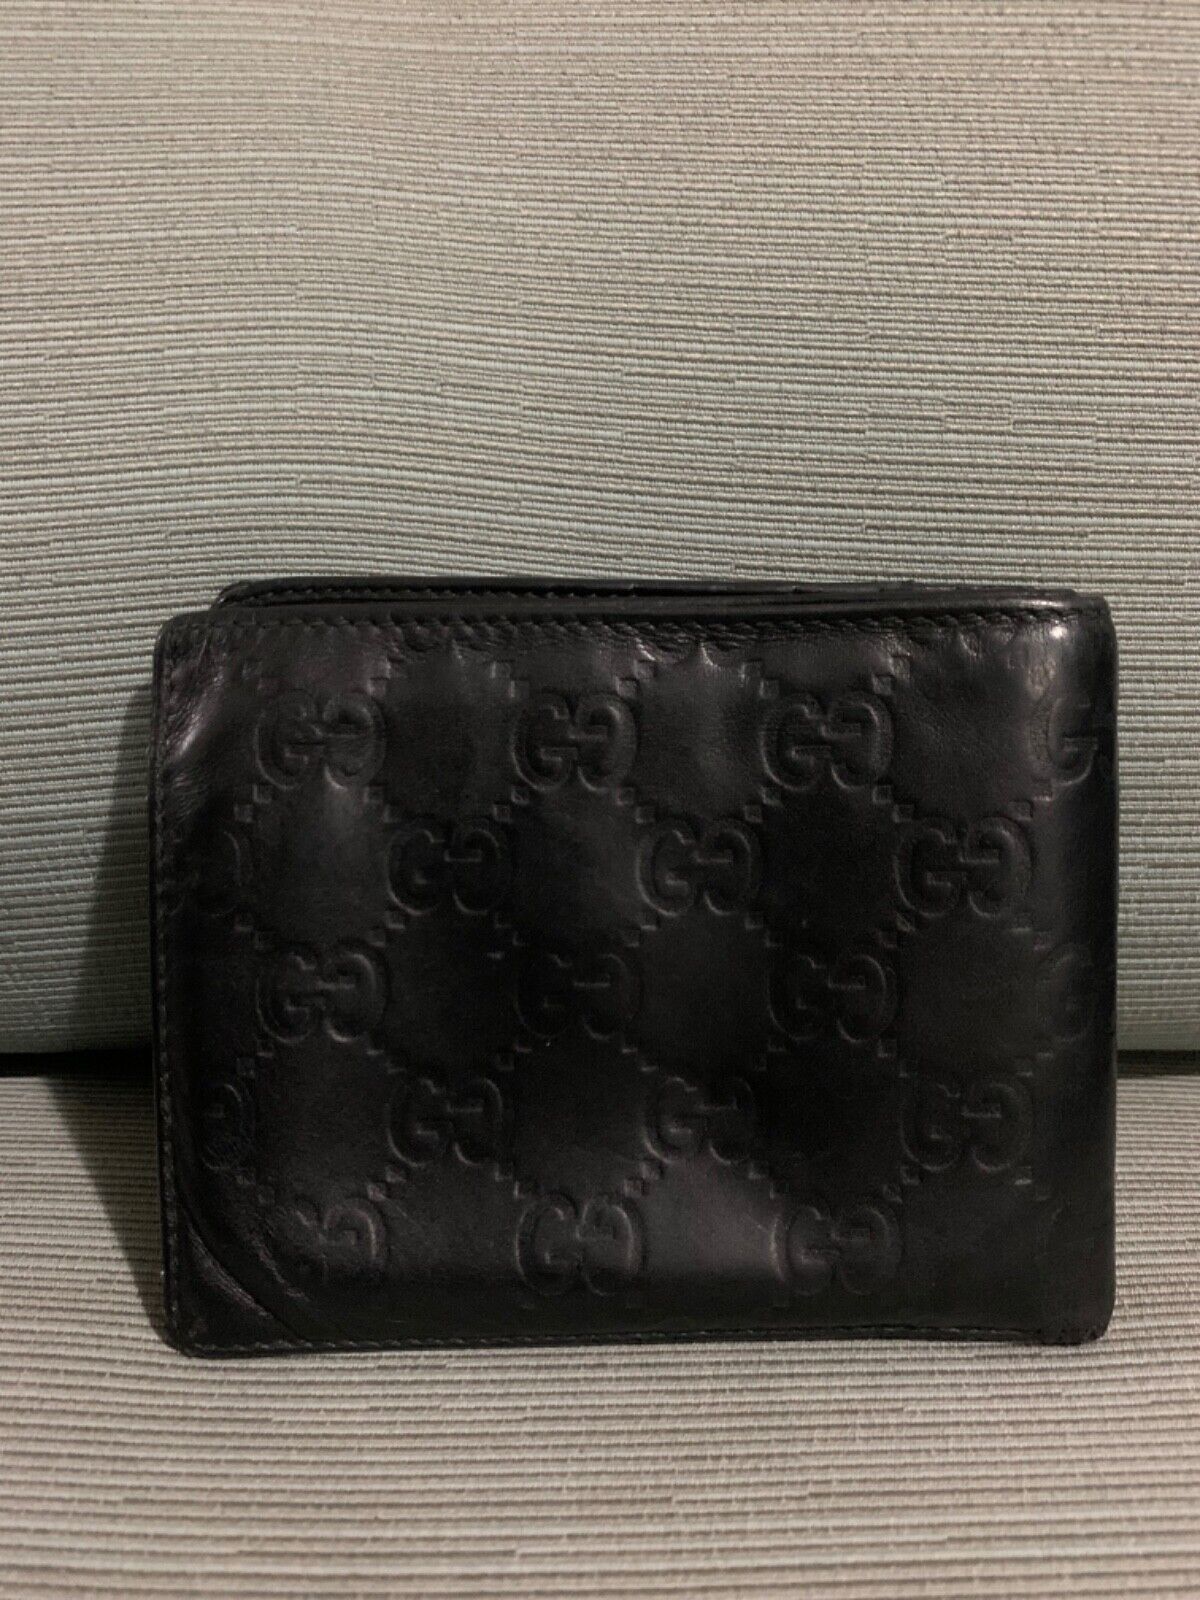 Authentic Gucci Black Leather GG Monogram Mens Bifold Wallet  